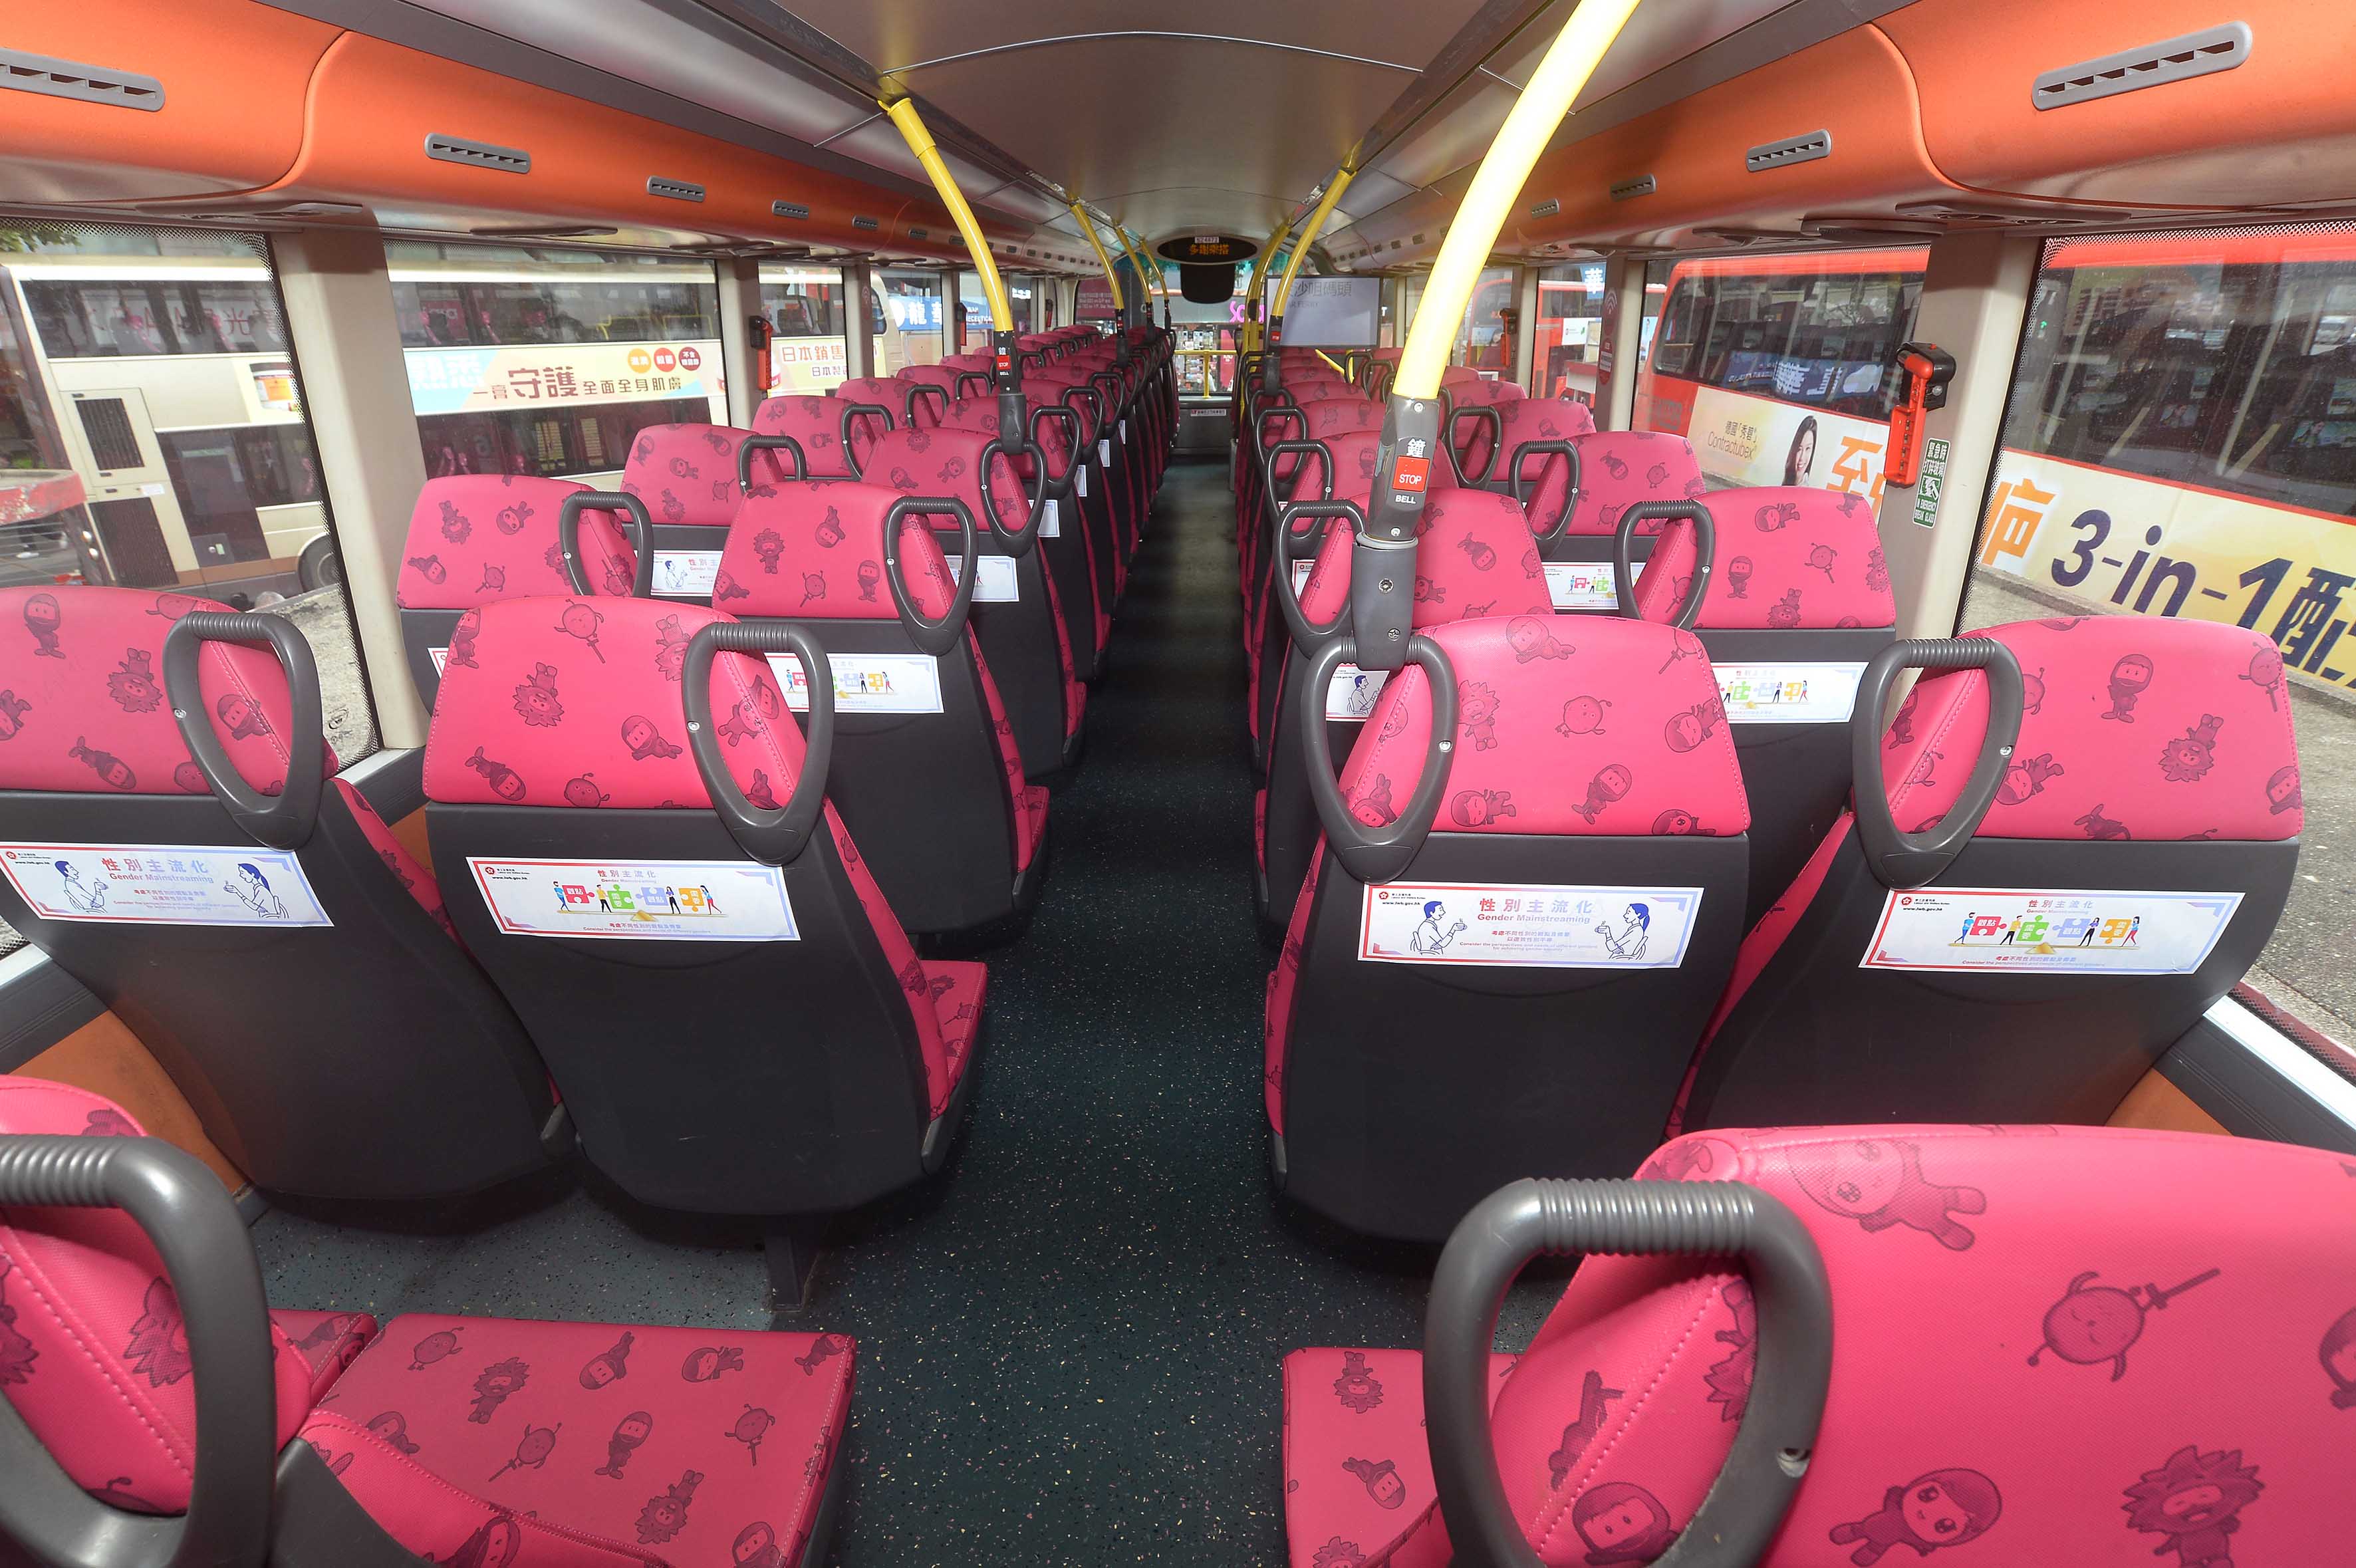 Bus Body and Seatback Advertising on Gender Mainstreaming photo4